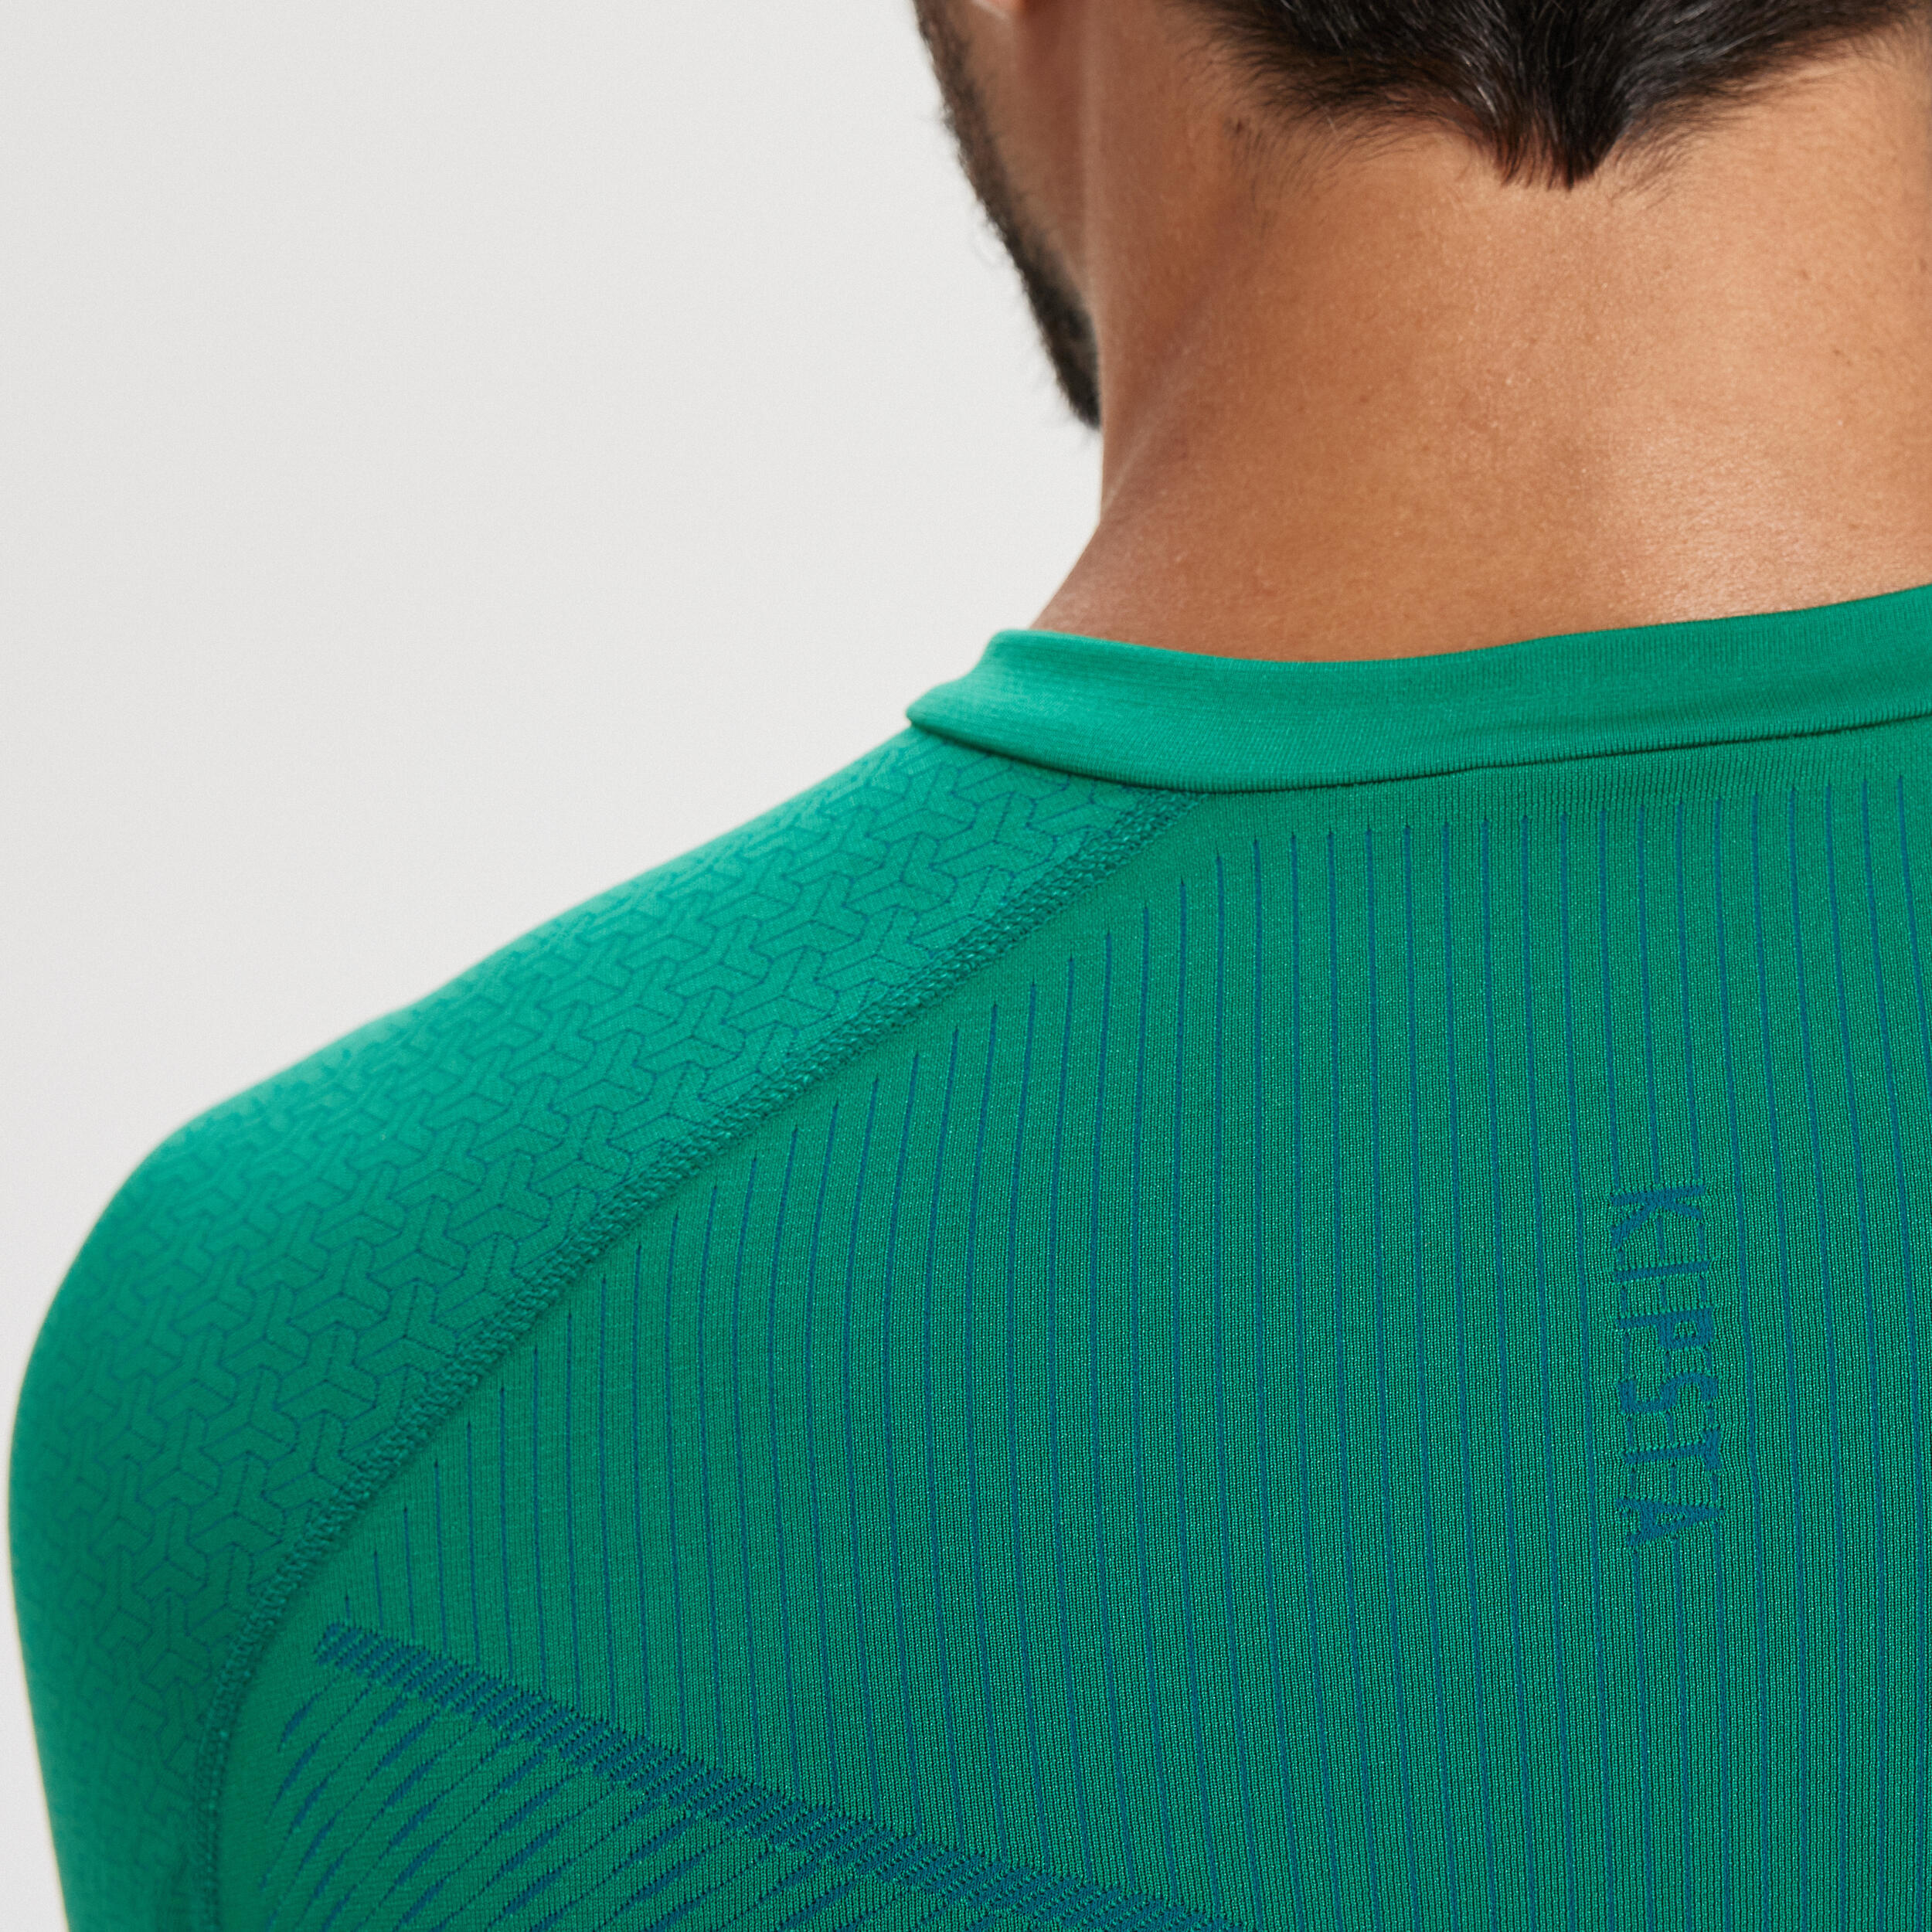 Adult Long-Sleeved Thermal Base Layer Top Keepdry 500 - Green 8/14